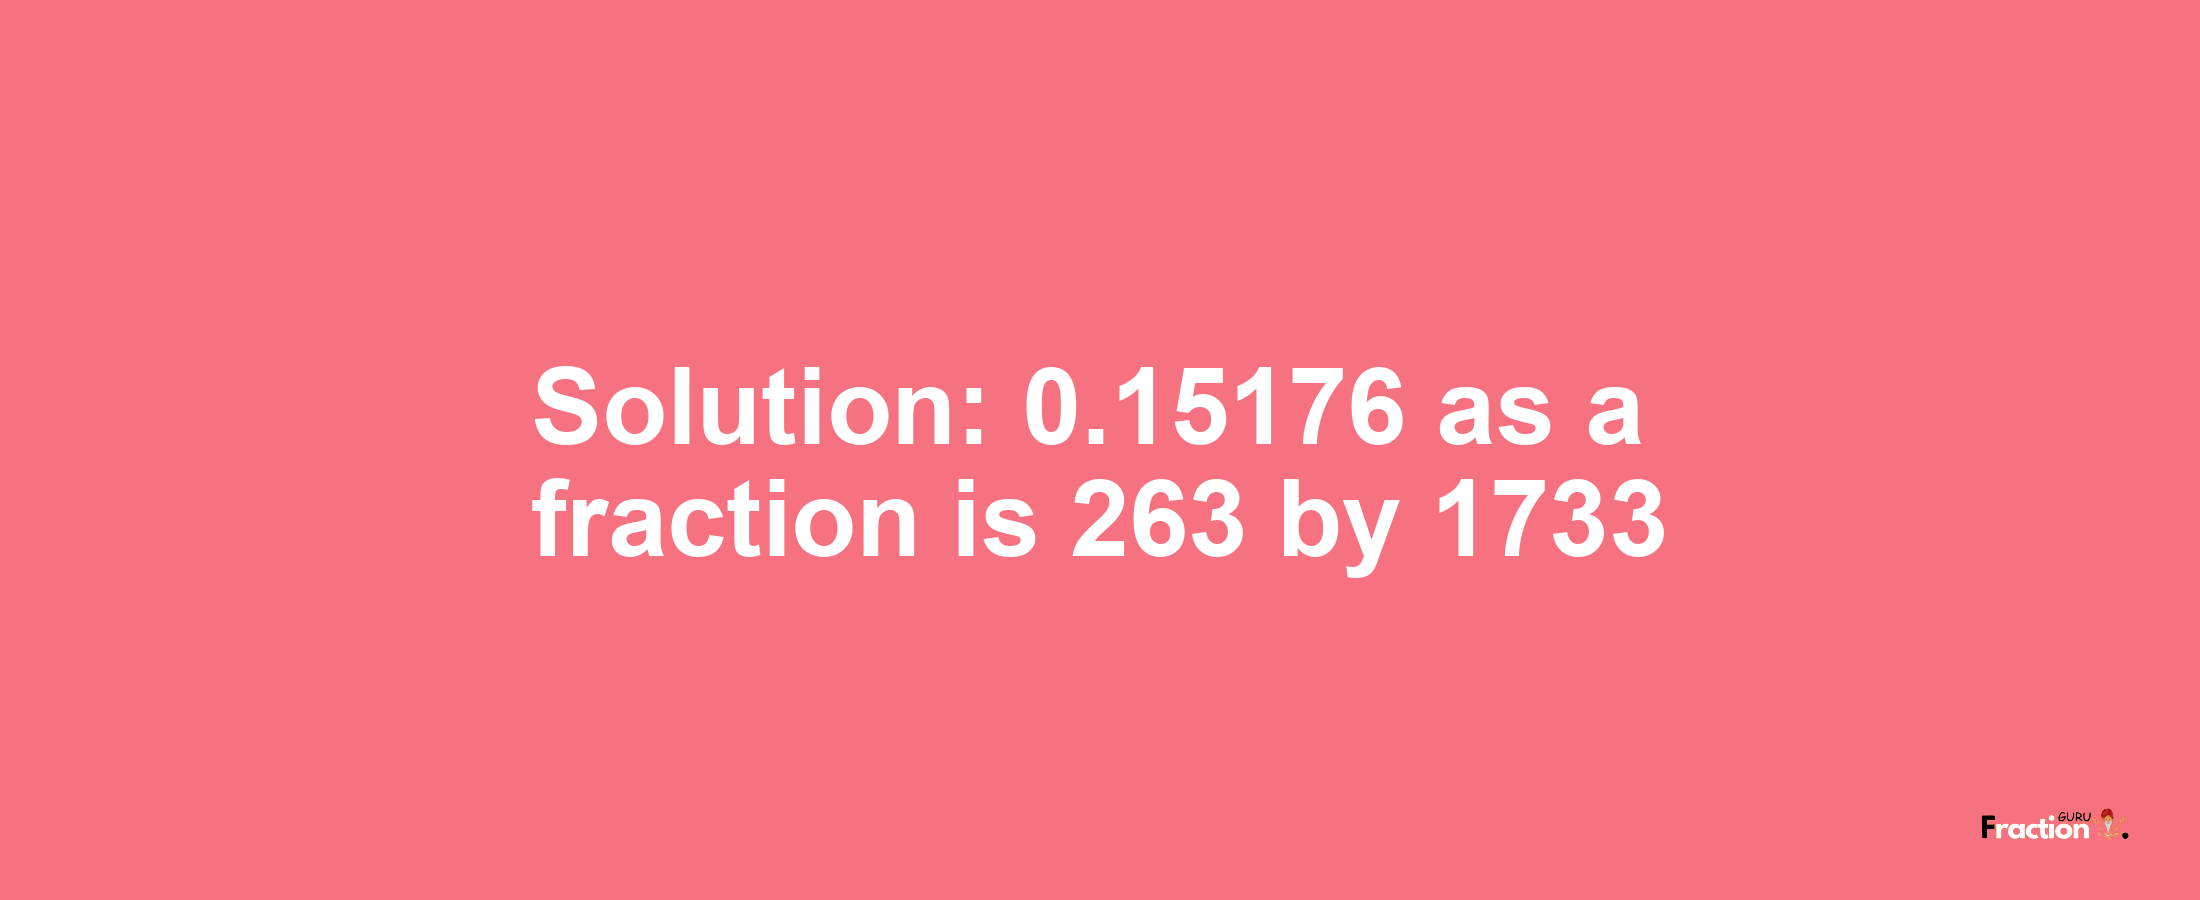 Solution:0.15176 as a fraction is 263/1733